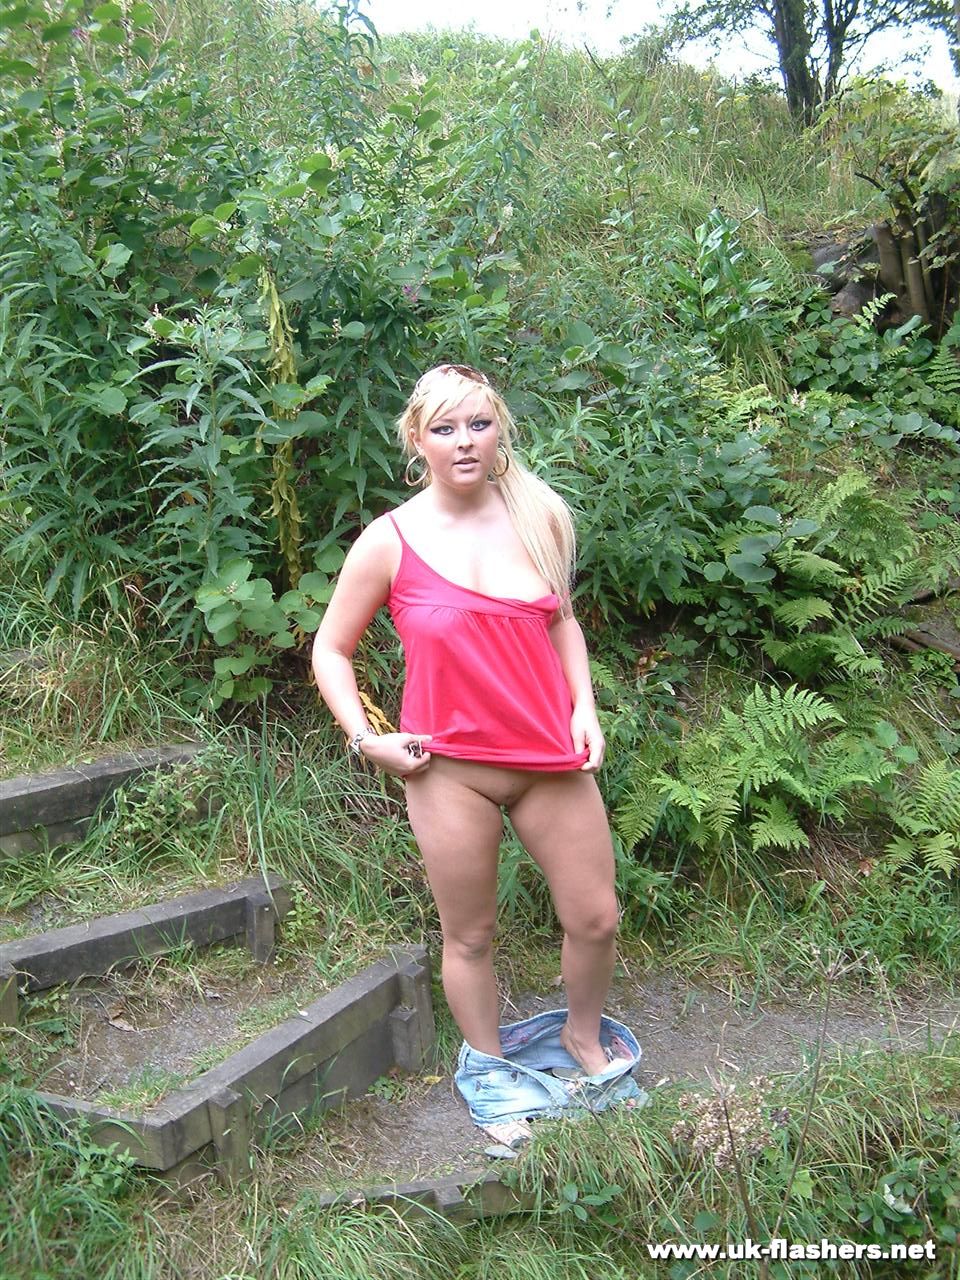 Overweight UK female with blonde hair strips naked on a popular walking trails porn photo #428197332 | UK Flashers Pics, Lena Leigh, Public, mobile porn